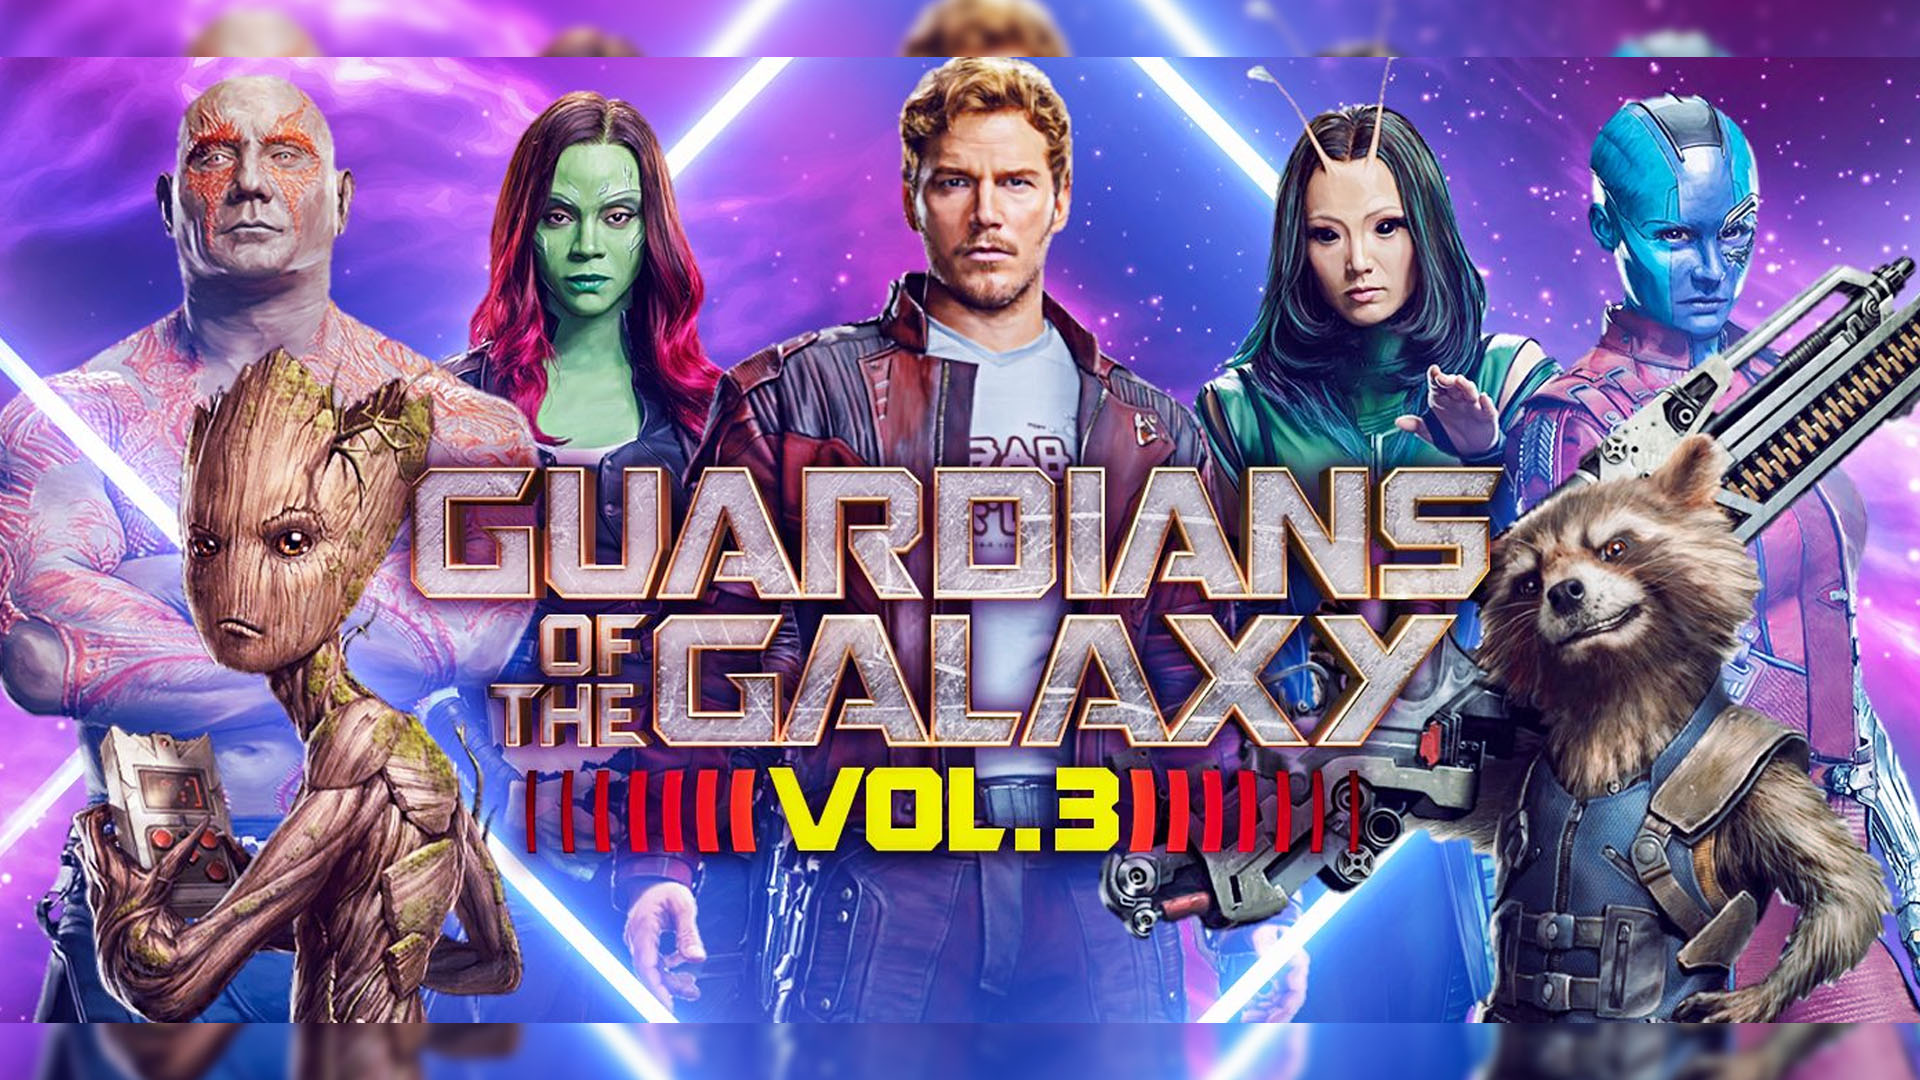 Guardians of the galaxy volume 3 main